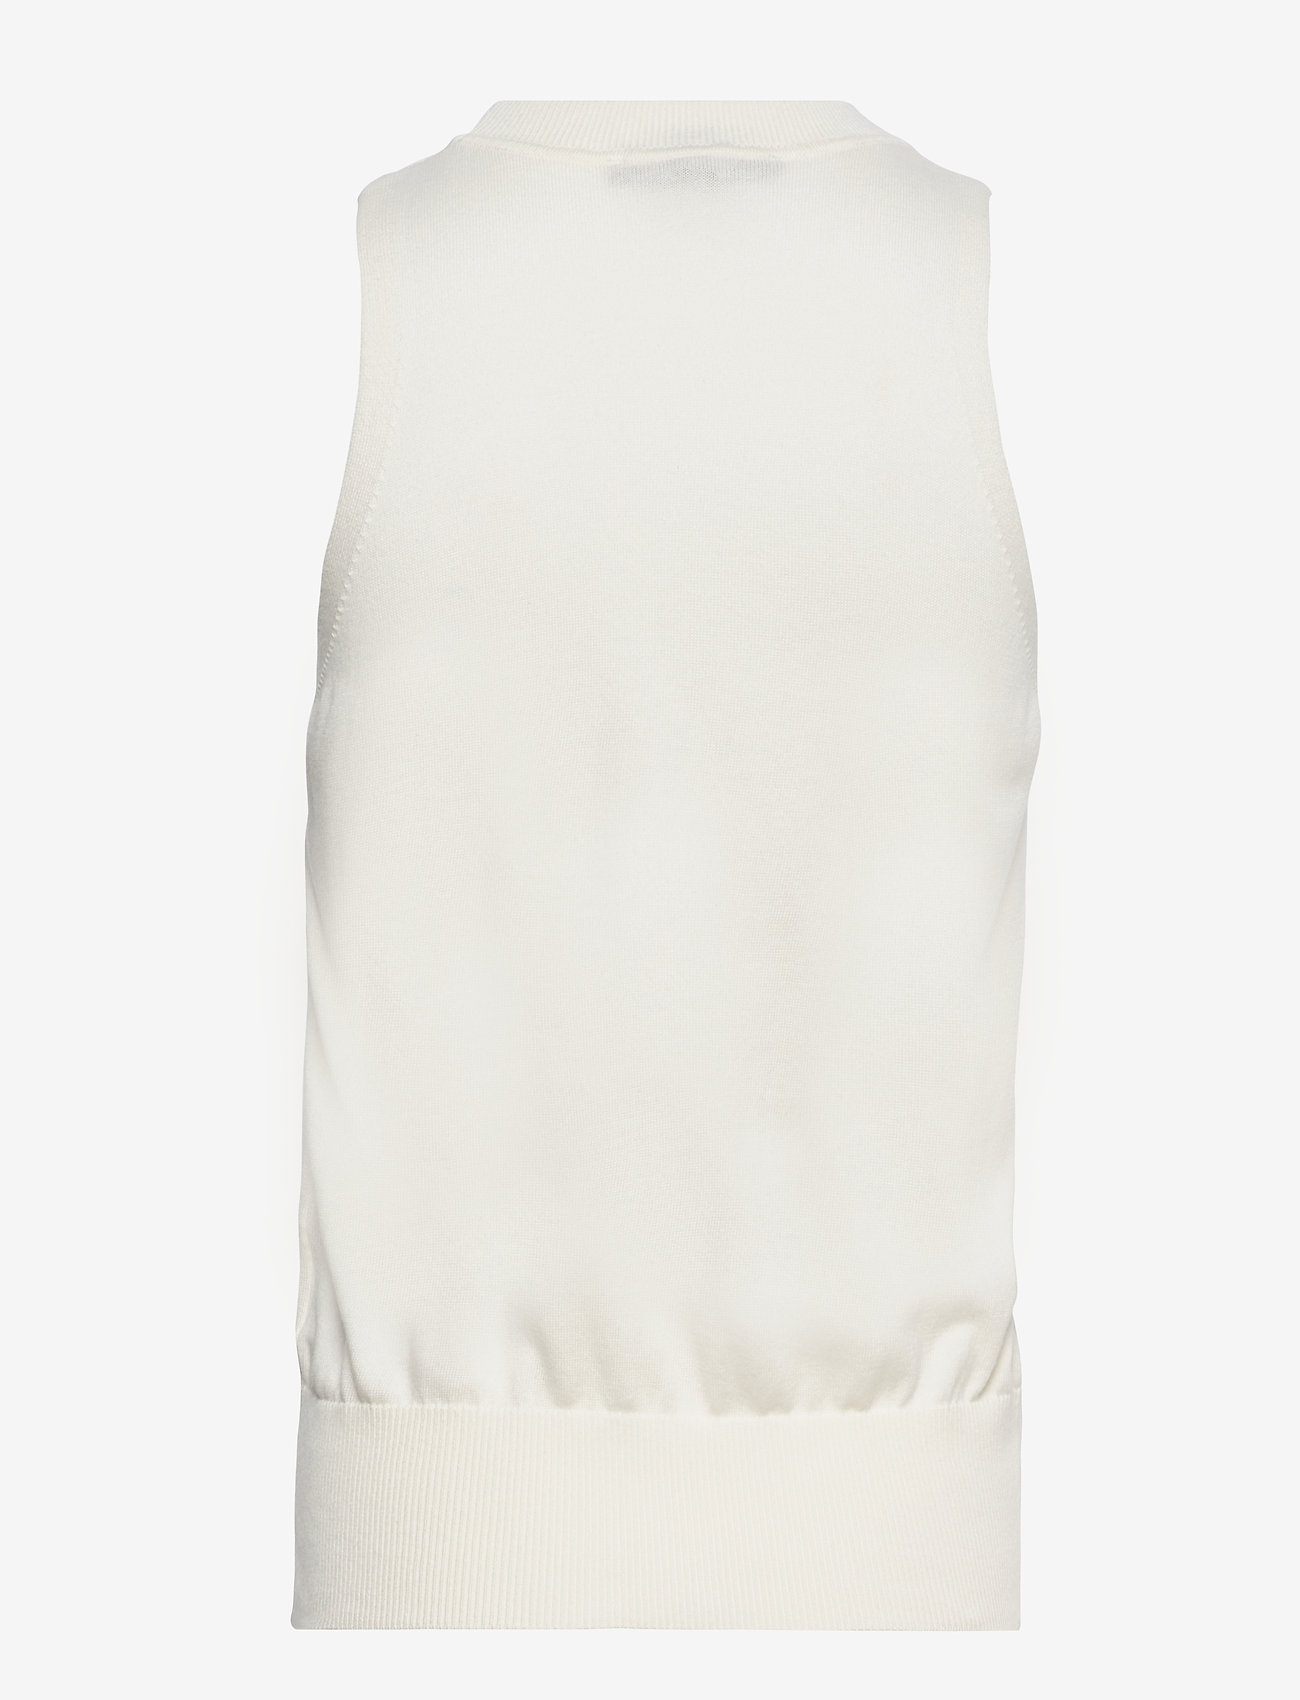 Esprit Collection - Knit top containing LENZING™ ECOVERO™ - sleeveless tops - off white - 1